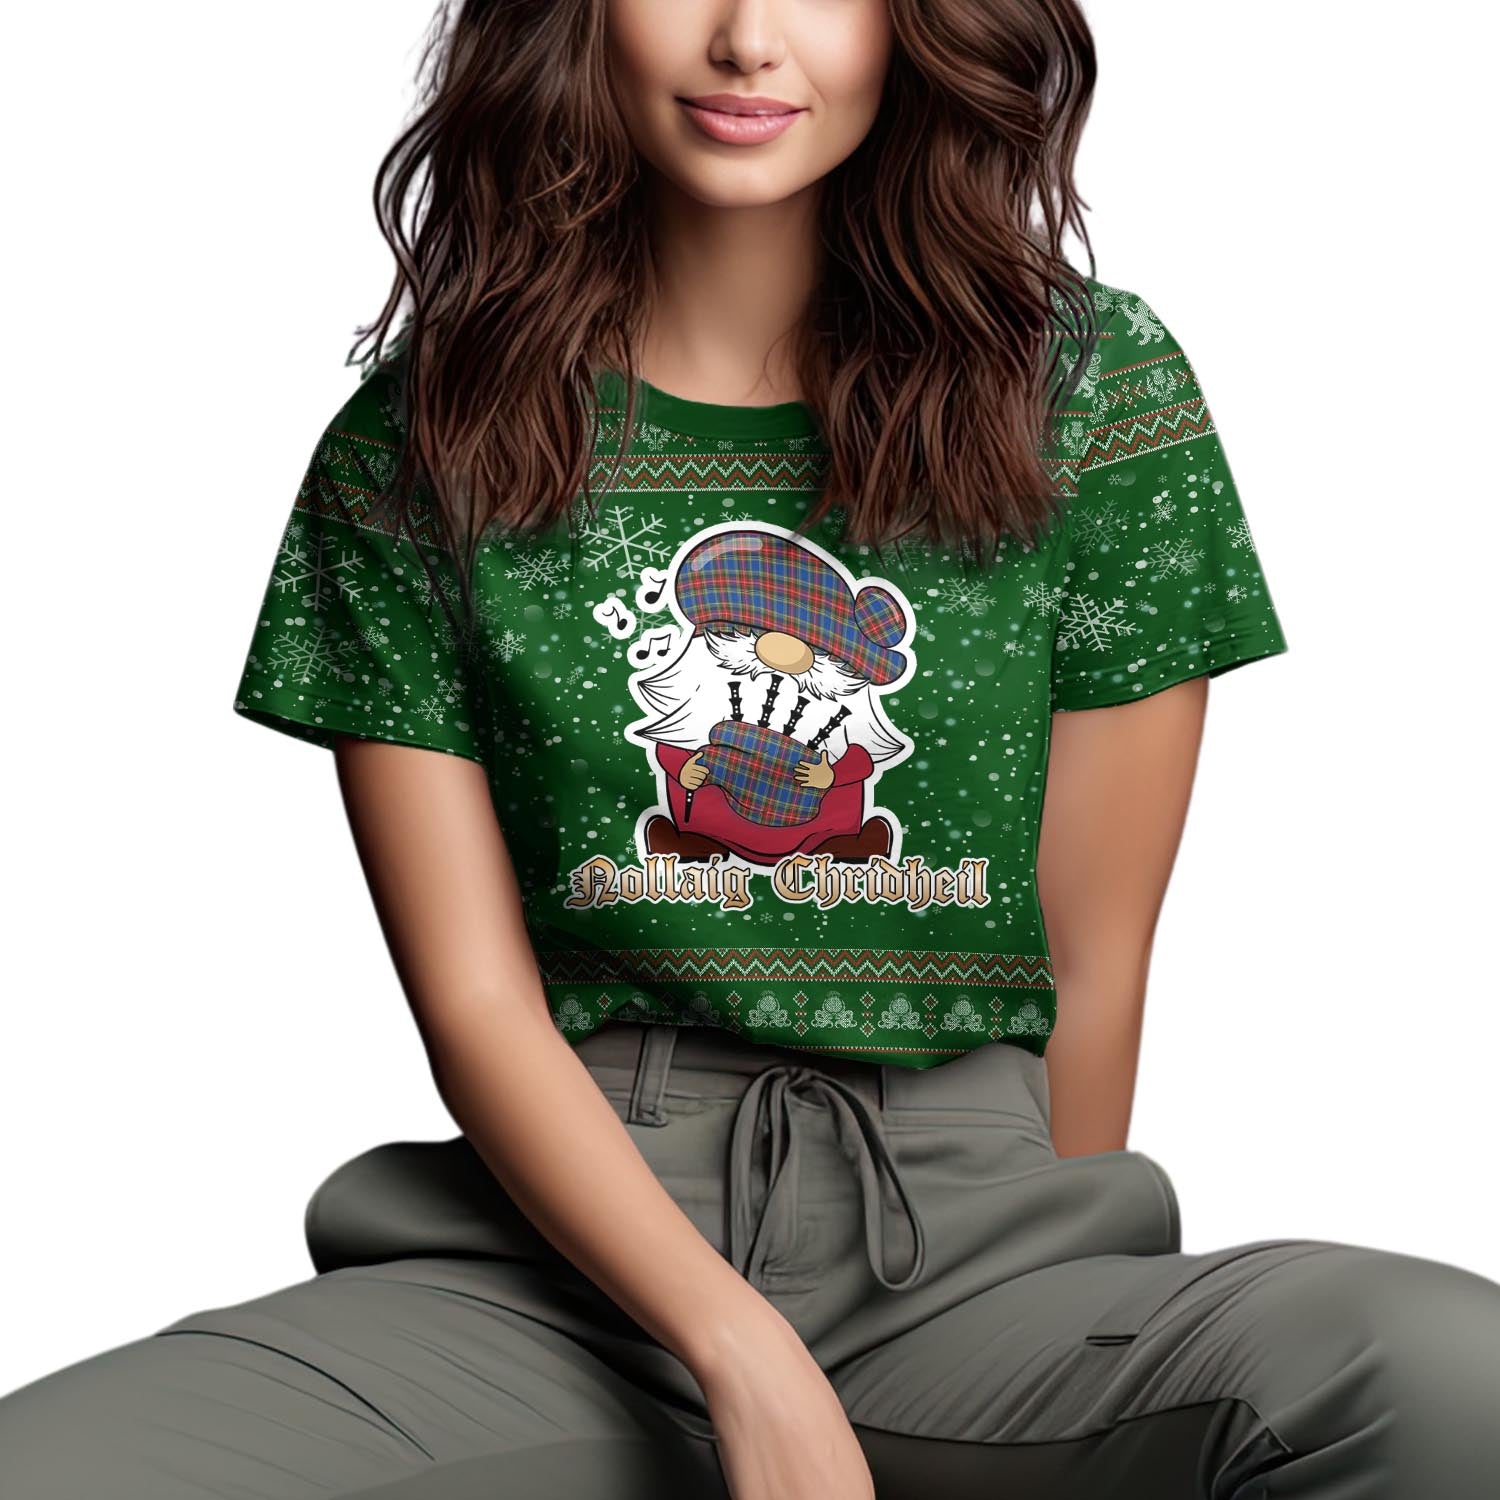 MacBeth Clan Christmas Family T-Shirt with Funny Gnome Playing Bagpipes Women's Shirt Green - Tartanvibesclothing